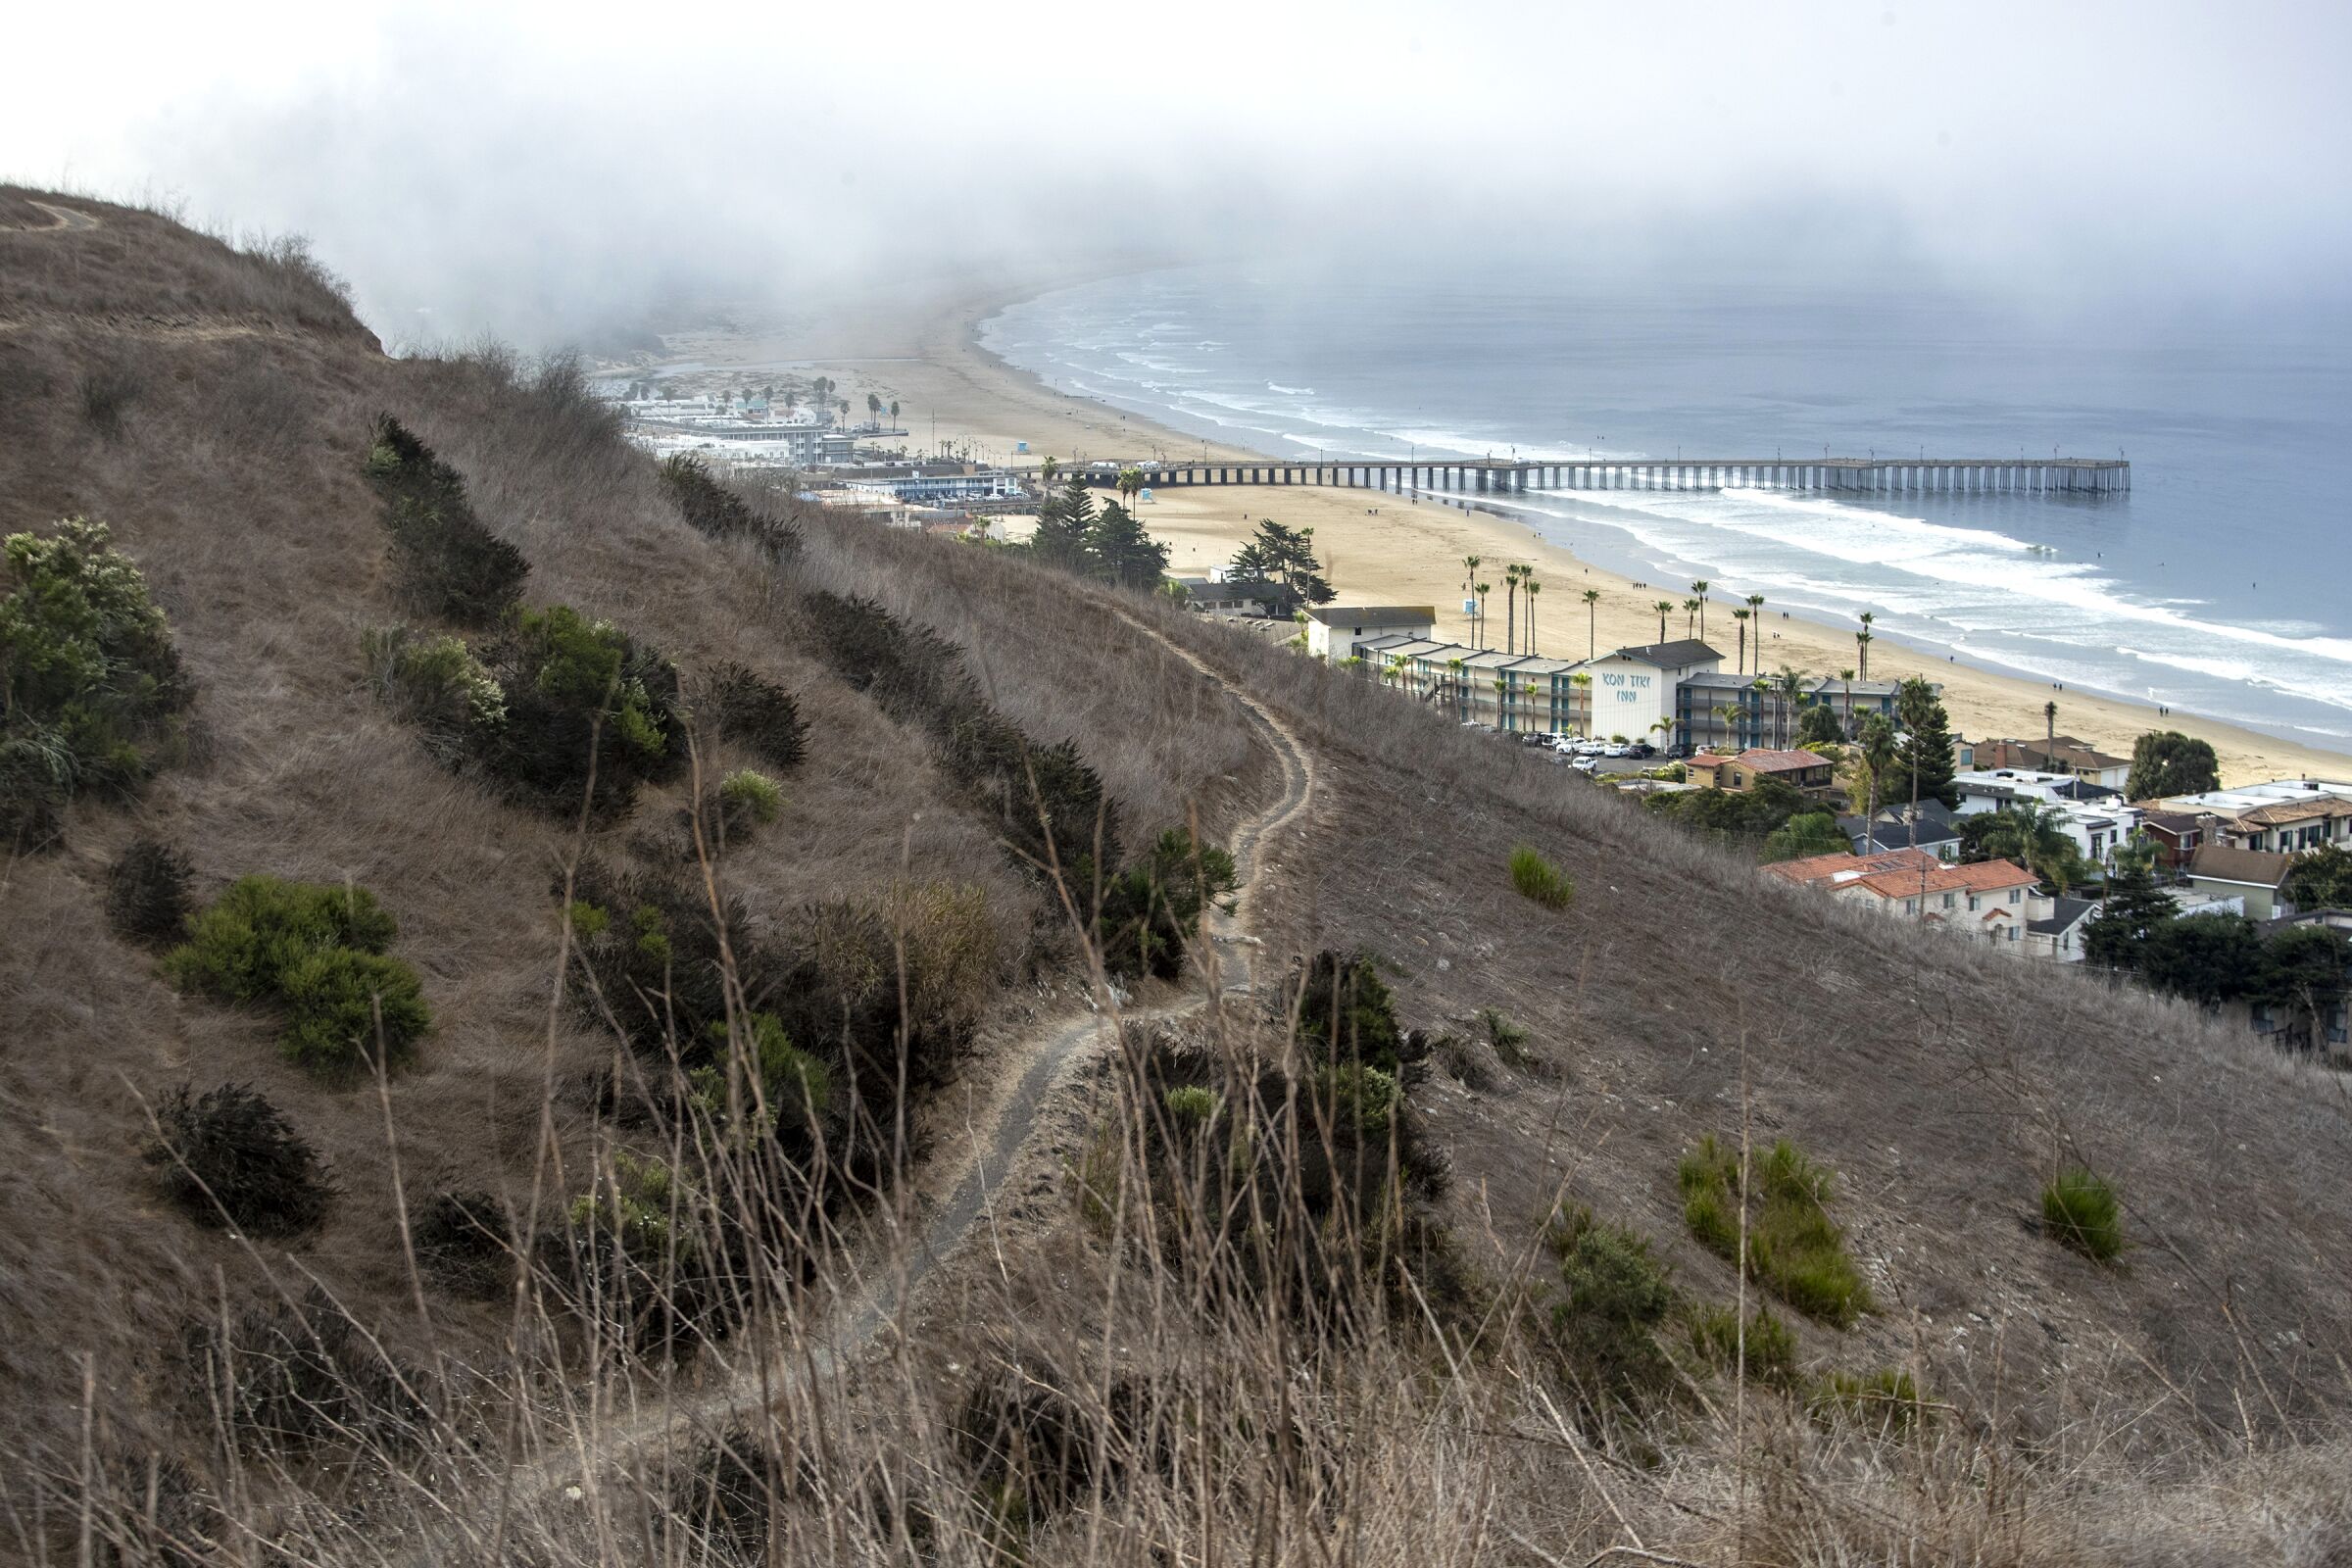 Low clouds drift over Pismo Beach in a view from the Range Road on the Pismo Preserve.